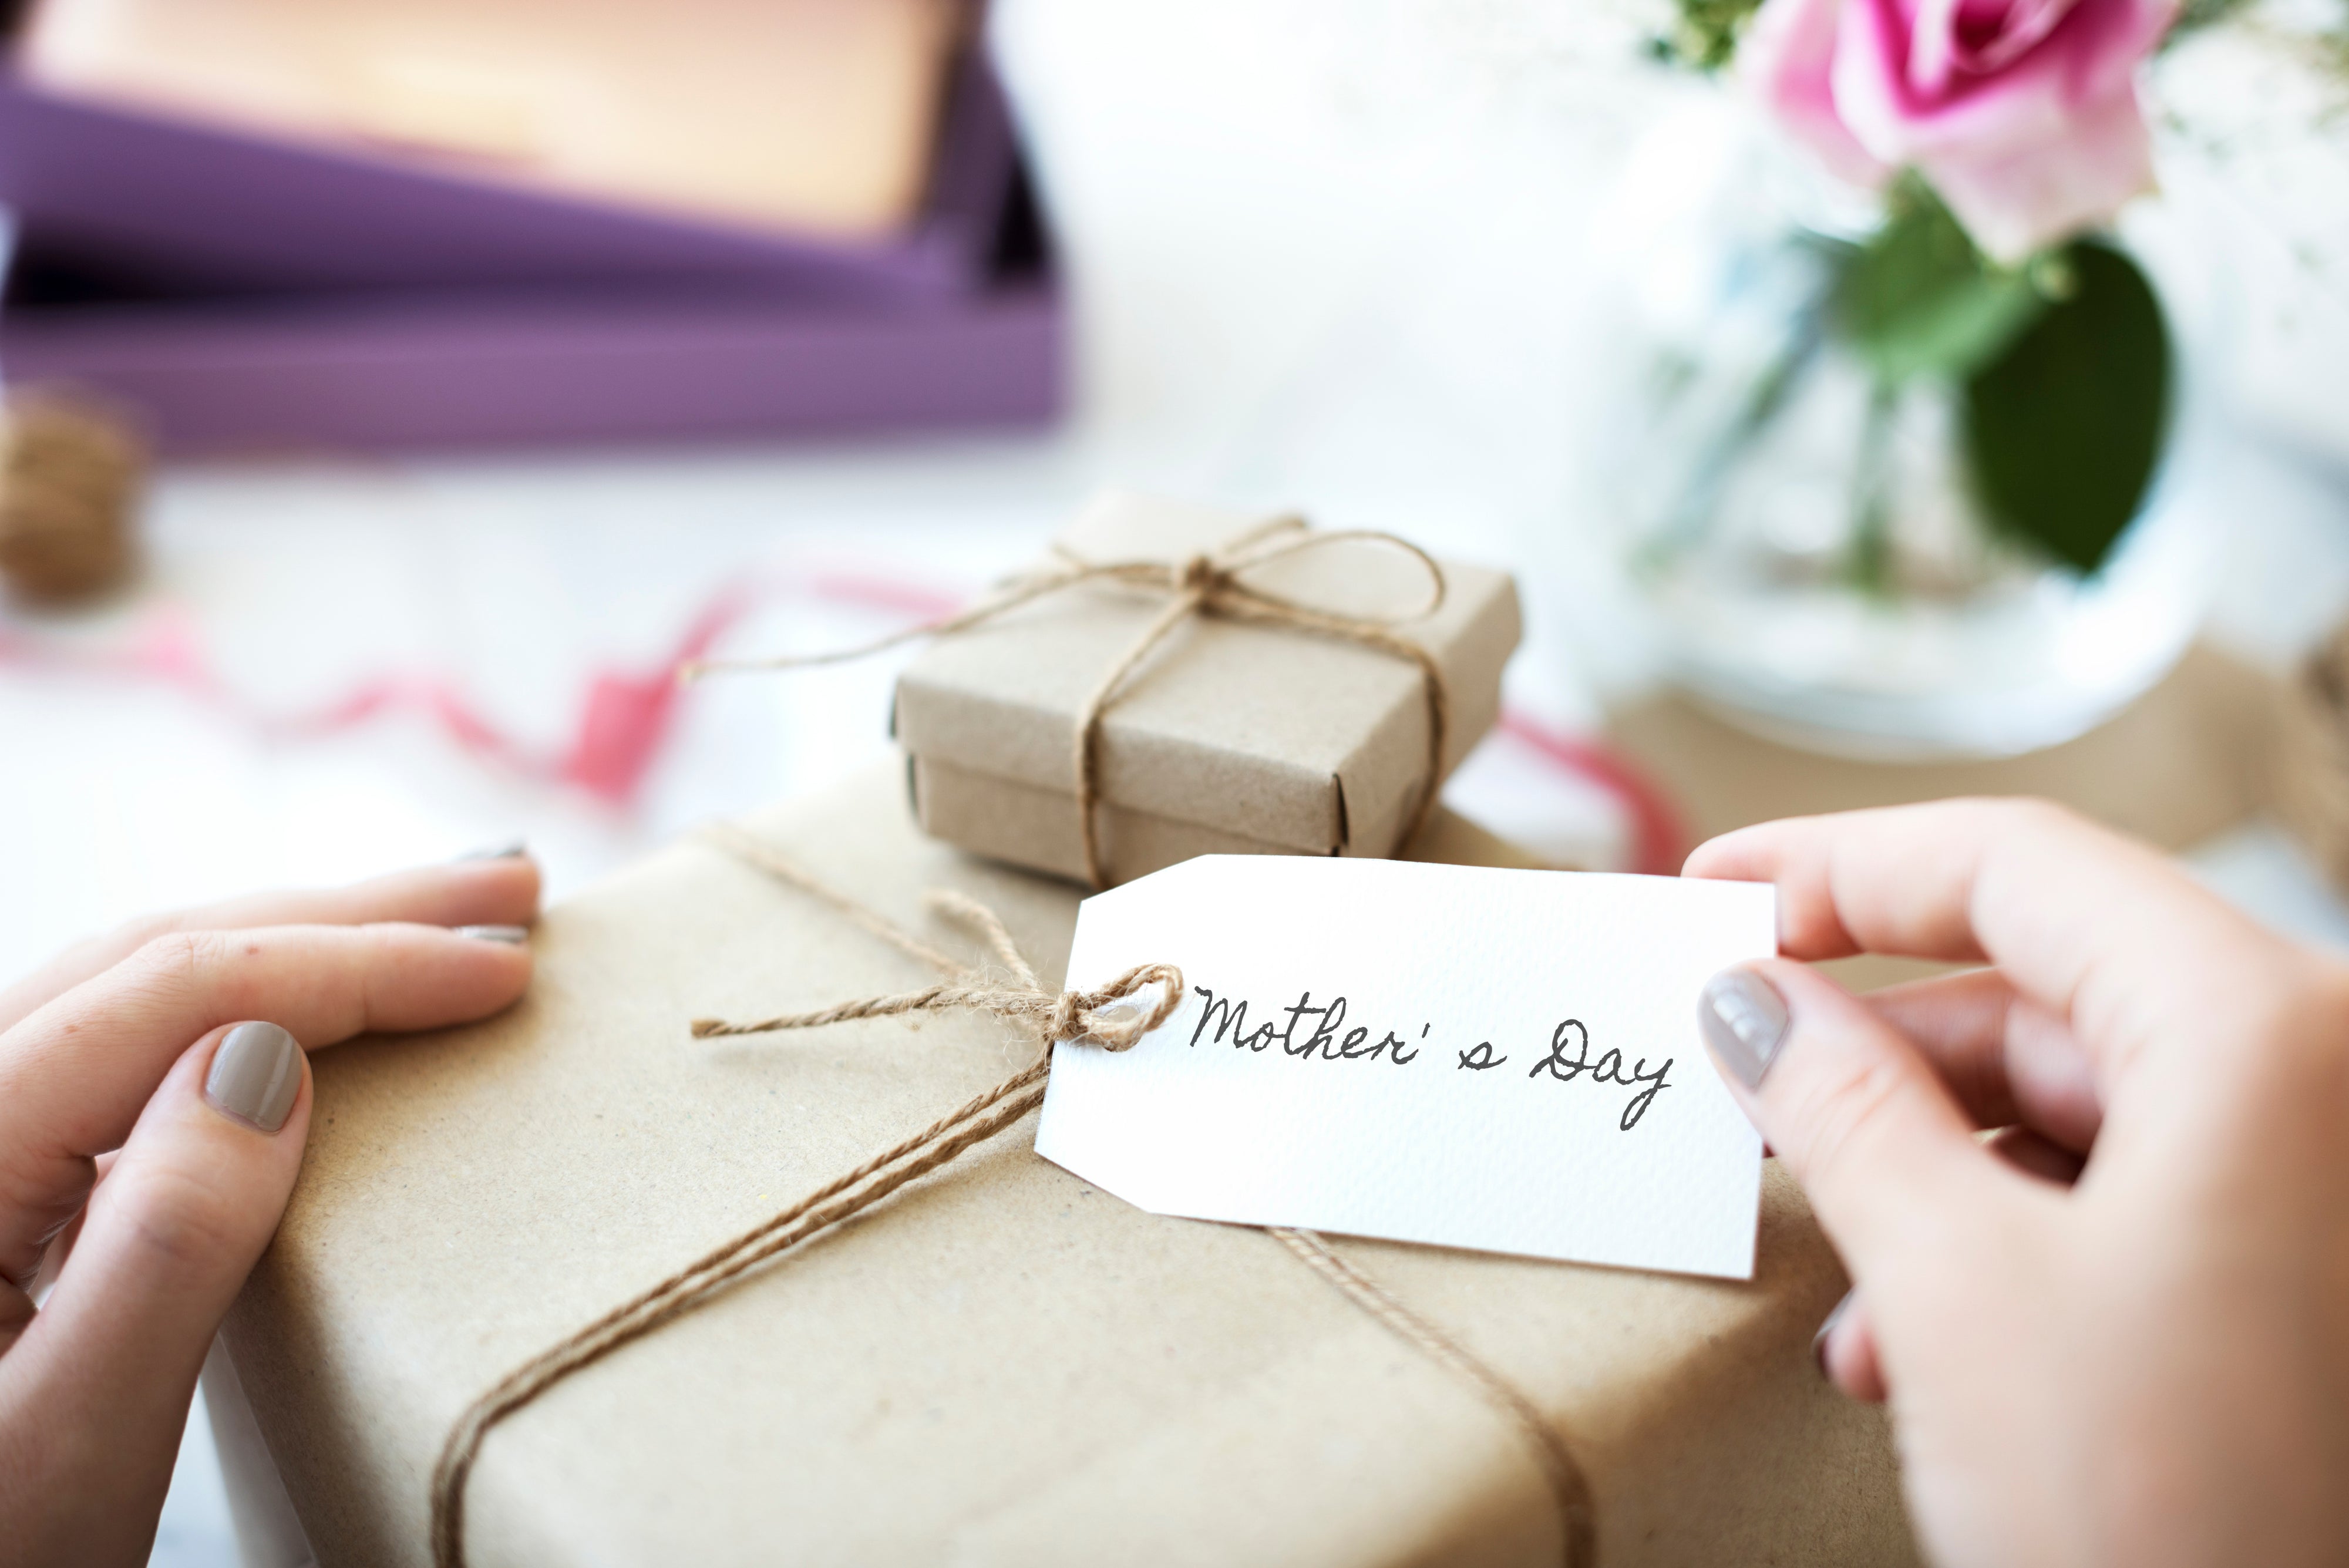 Mother's Day Celebration Ideas for the Entire Family